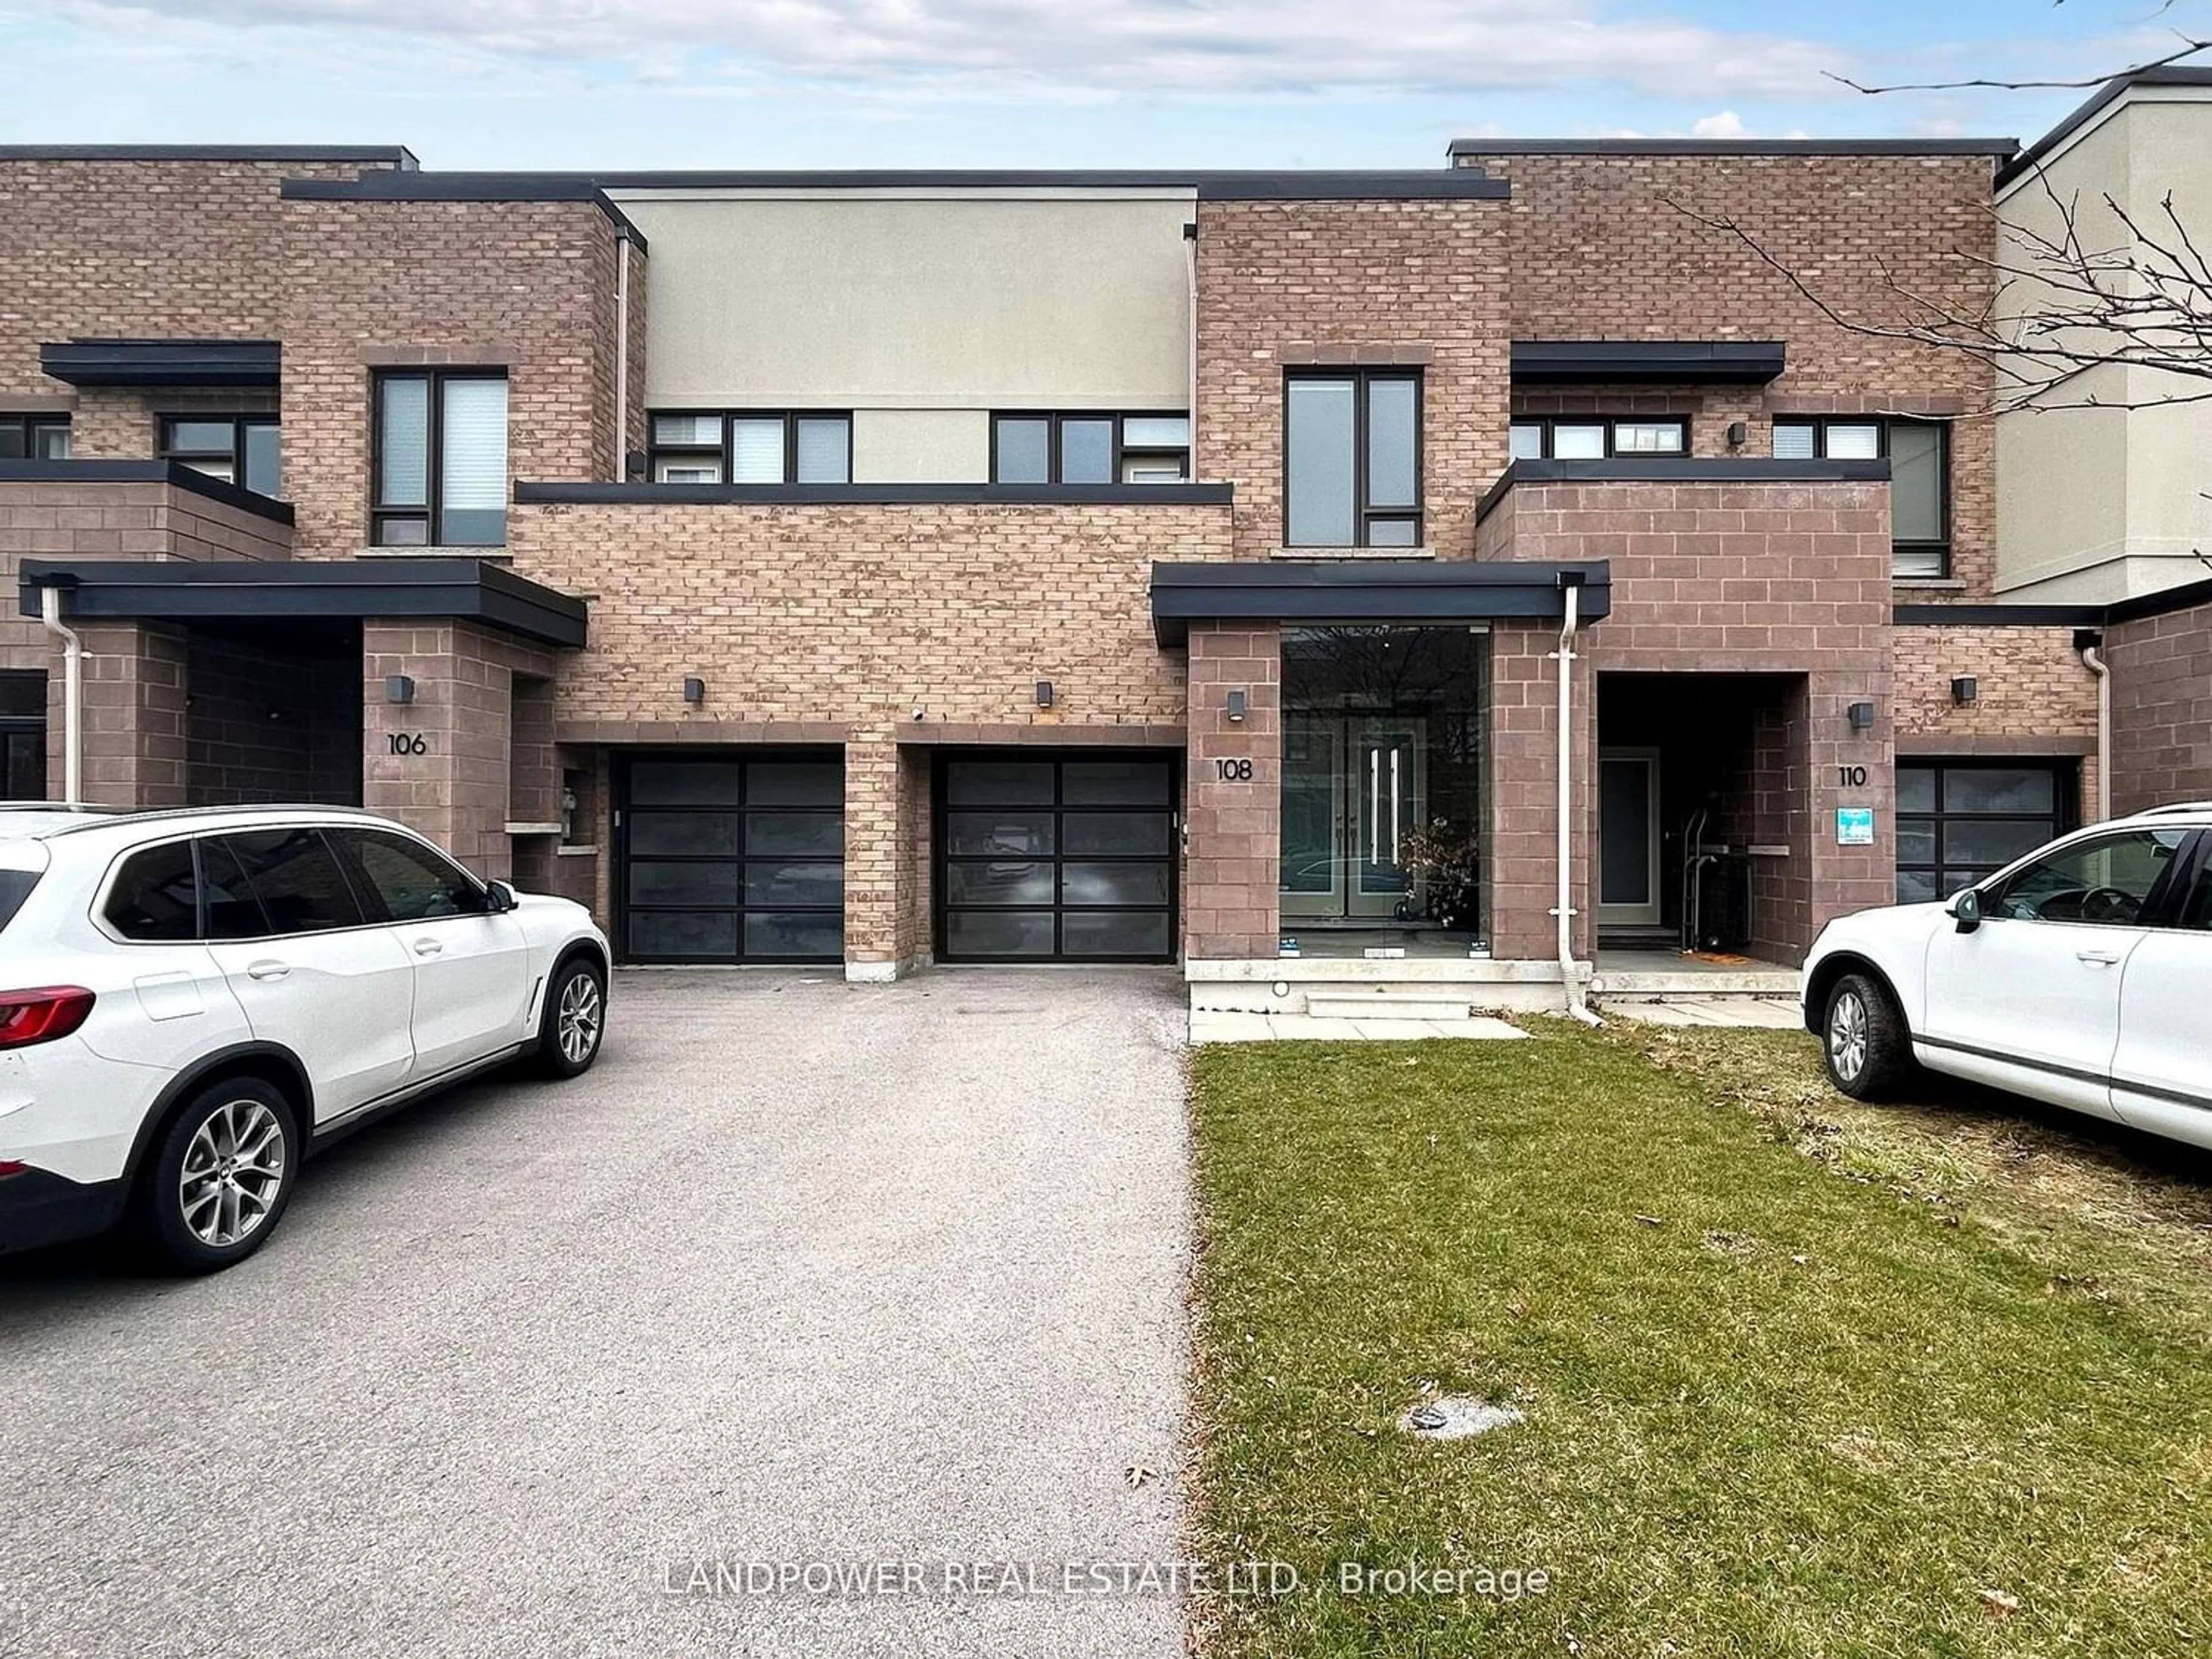 Home with brick exterior material for 108 Dariole Dr, Richmond Hill Ontario L4E 0Y8